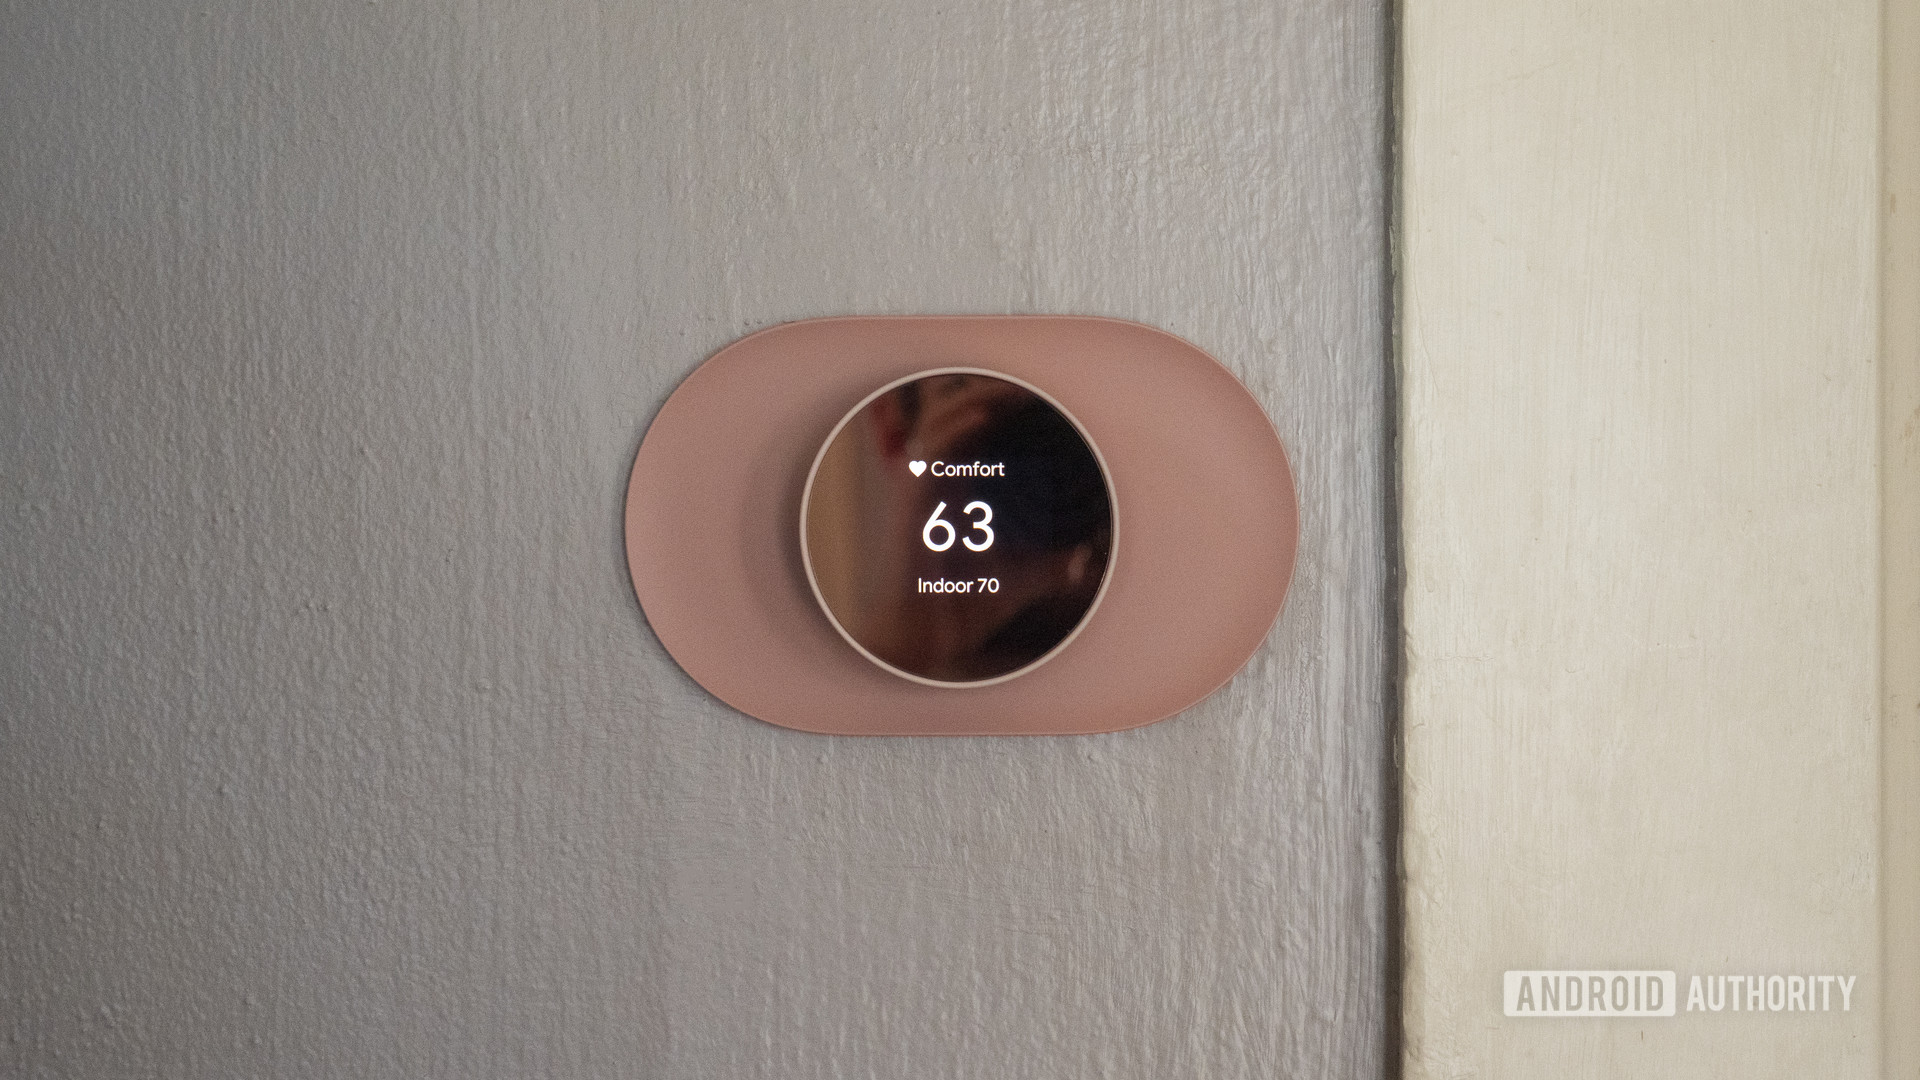 https://www.androidauthority.com/wp-content/uploads/2020/11/google-nest-thermostat-review-display-temperature-on-wall-2.jpg